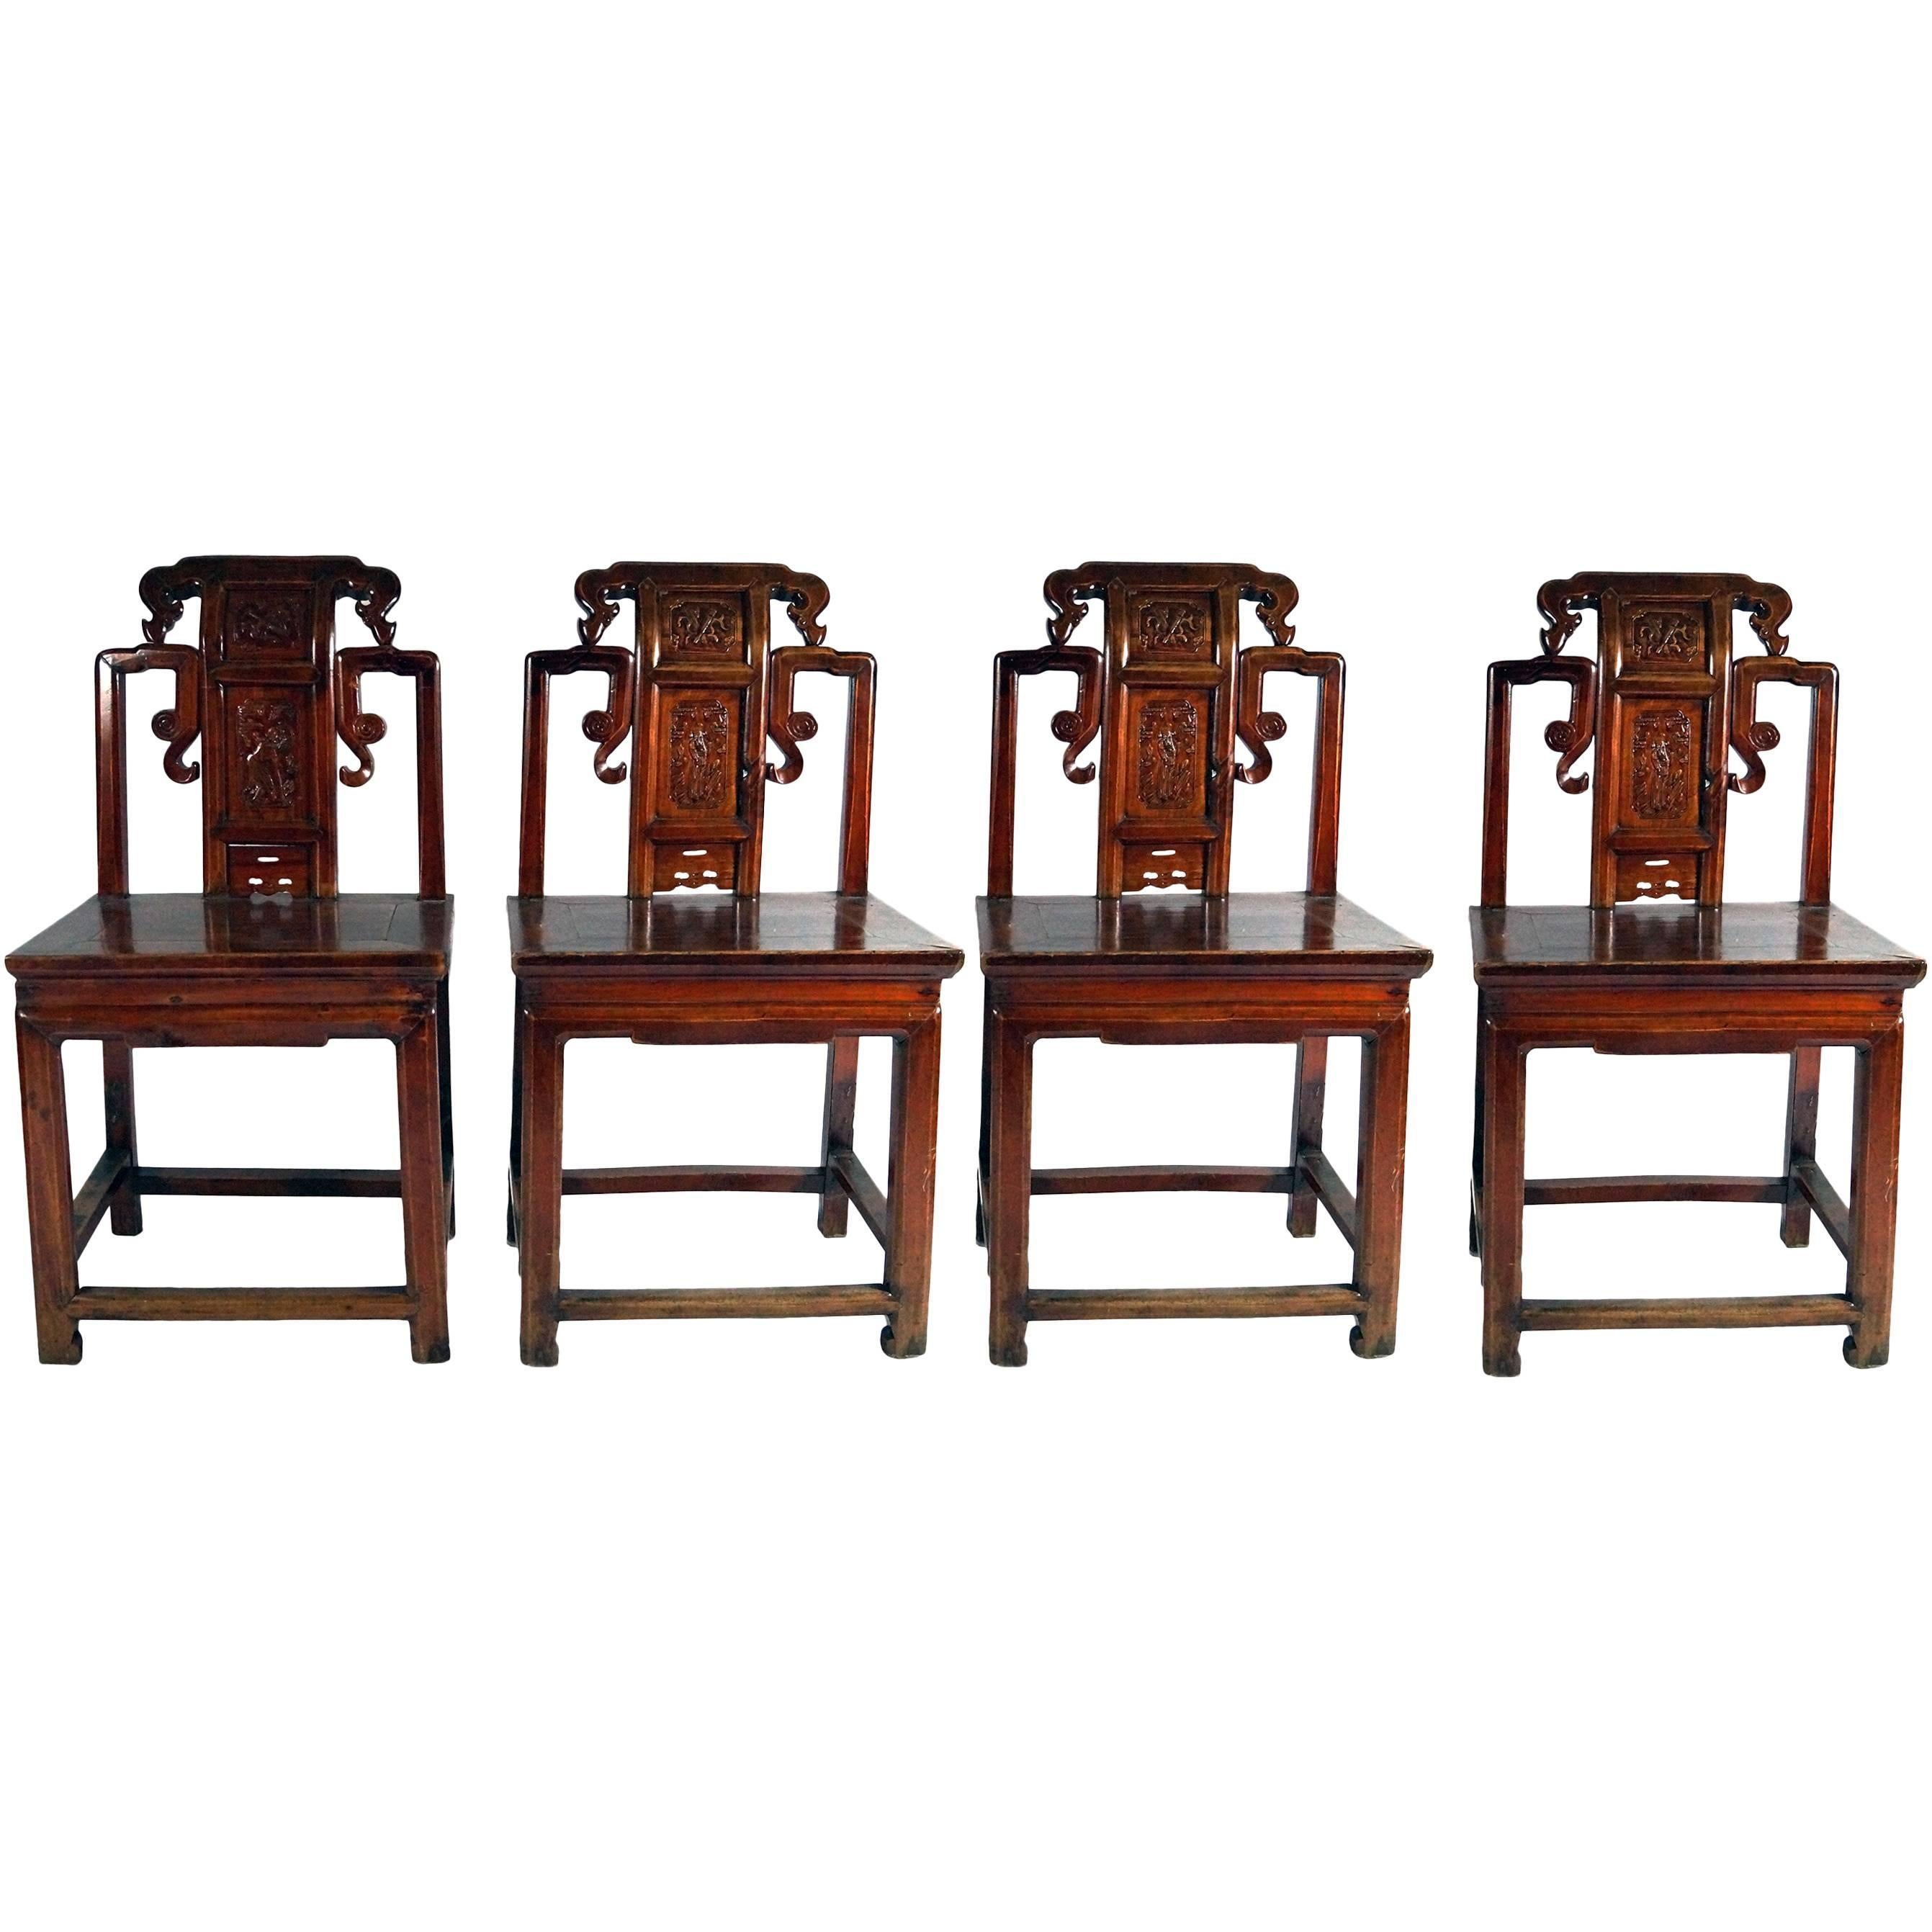 Four Striking Red Chinese Carved Wood Chairs, 1860s For Sale